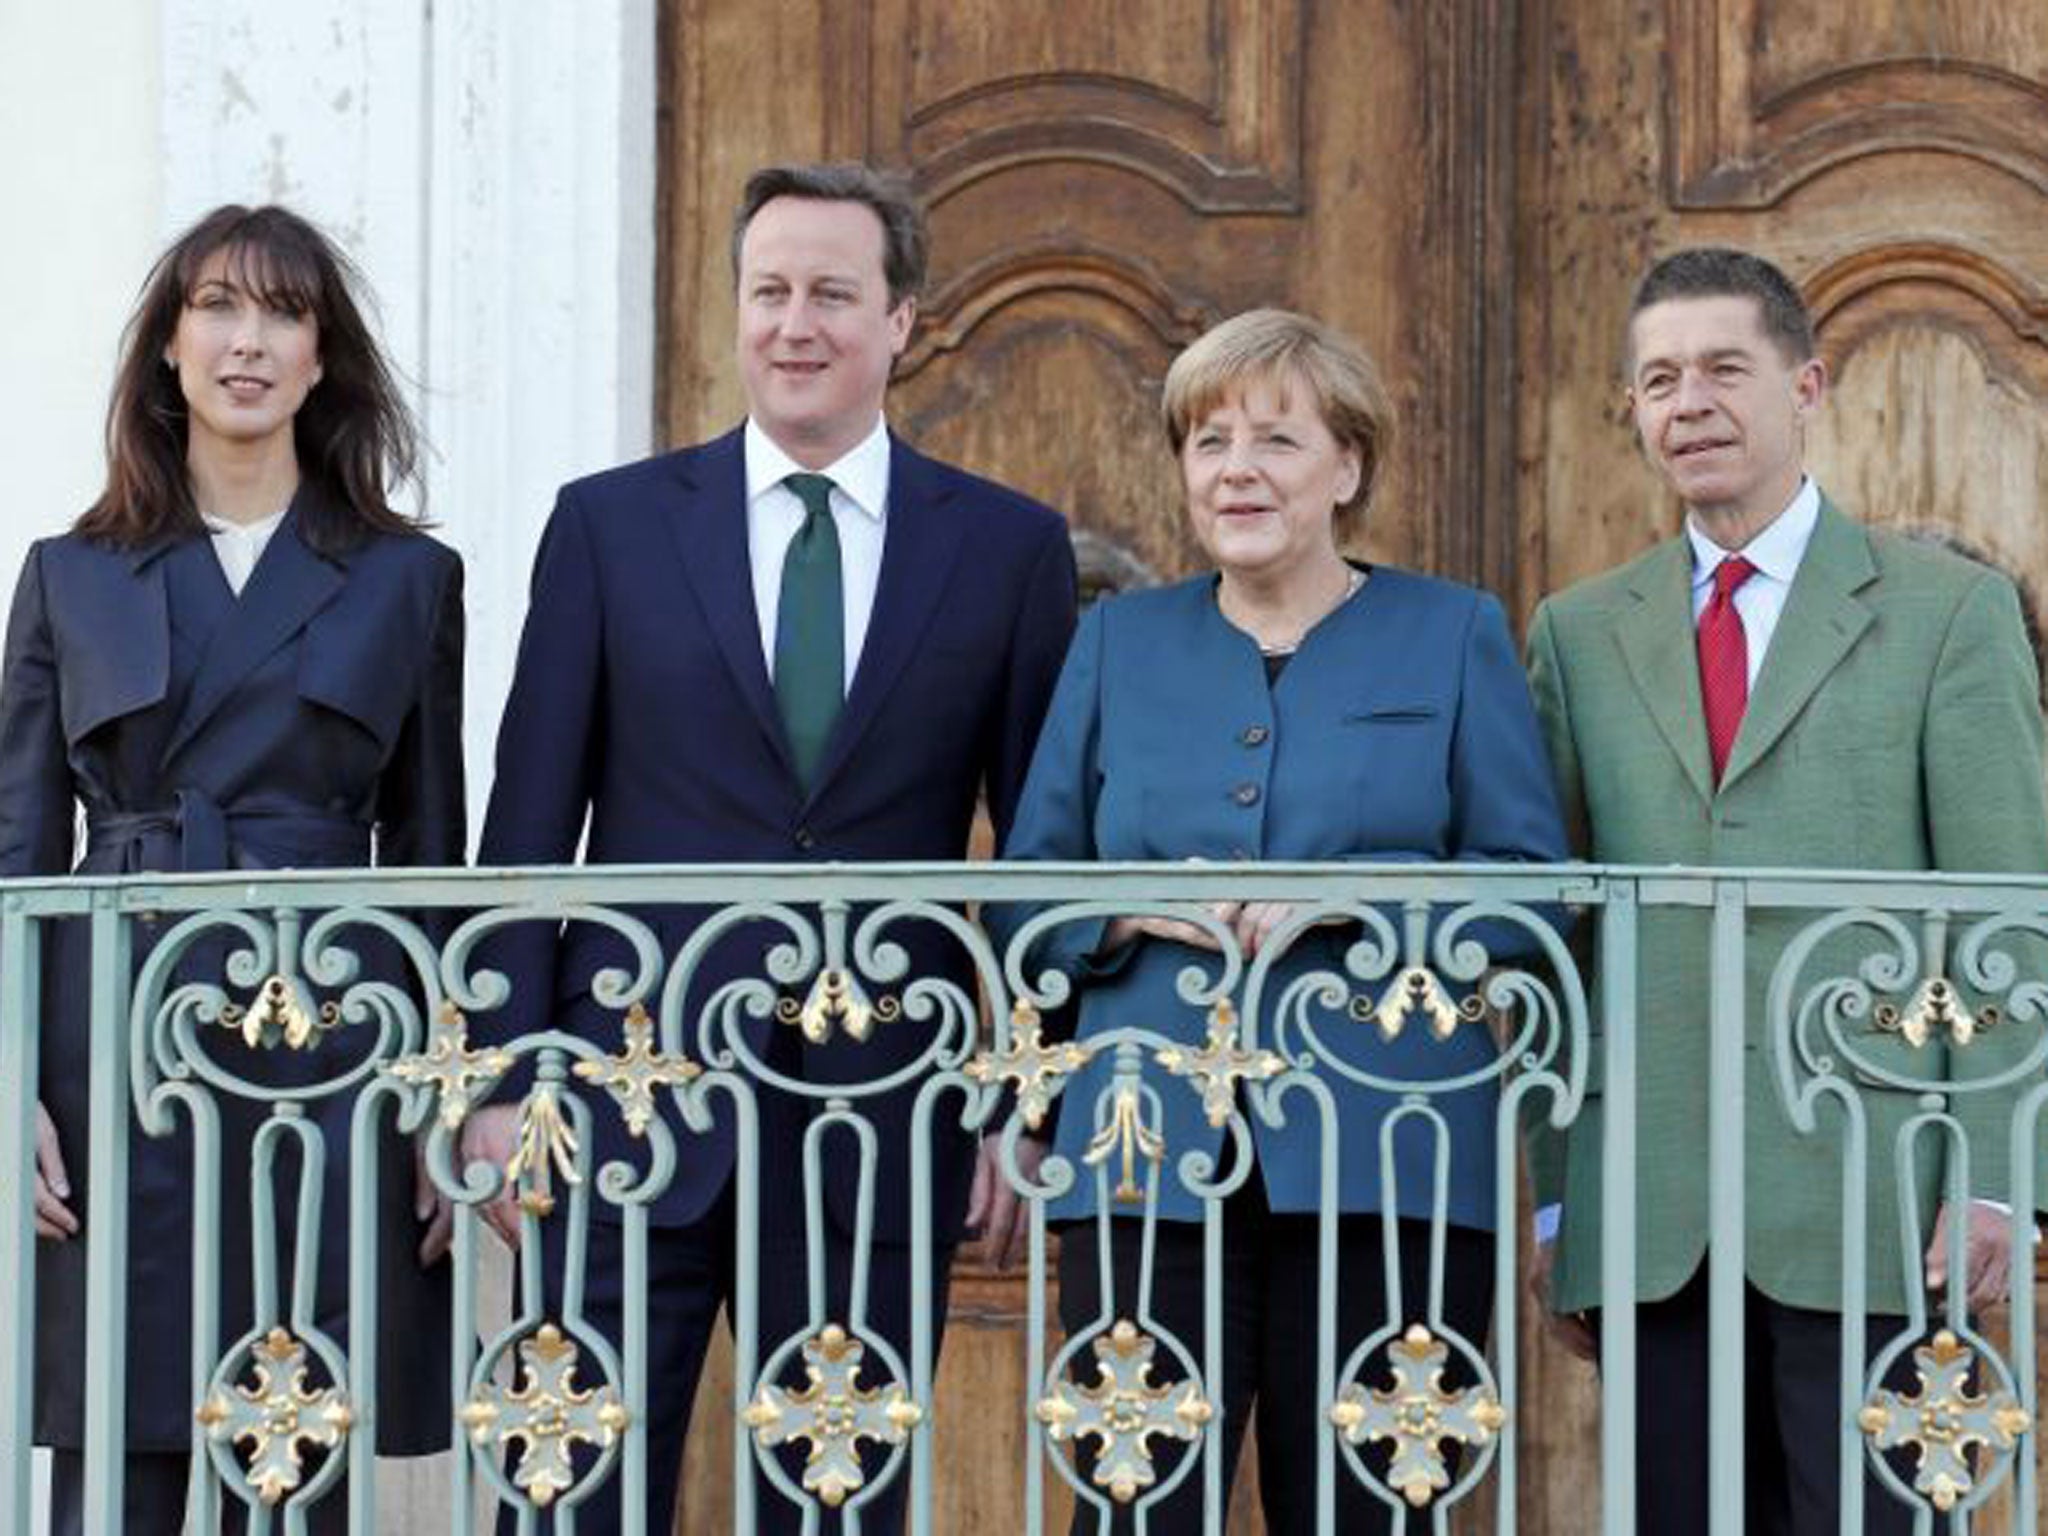 German Chancellor Angela Merkel and her husband Joachim Sauer (R) welcome Britain’s Prime Minister David Cameron and his wife Samantha (L) at the government’s guest house Schloss Meseberg